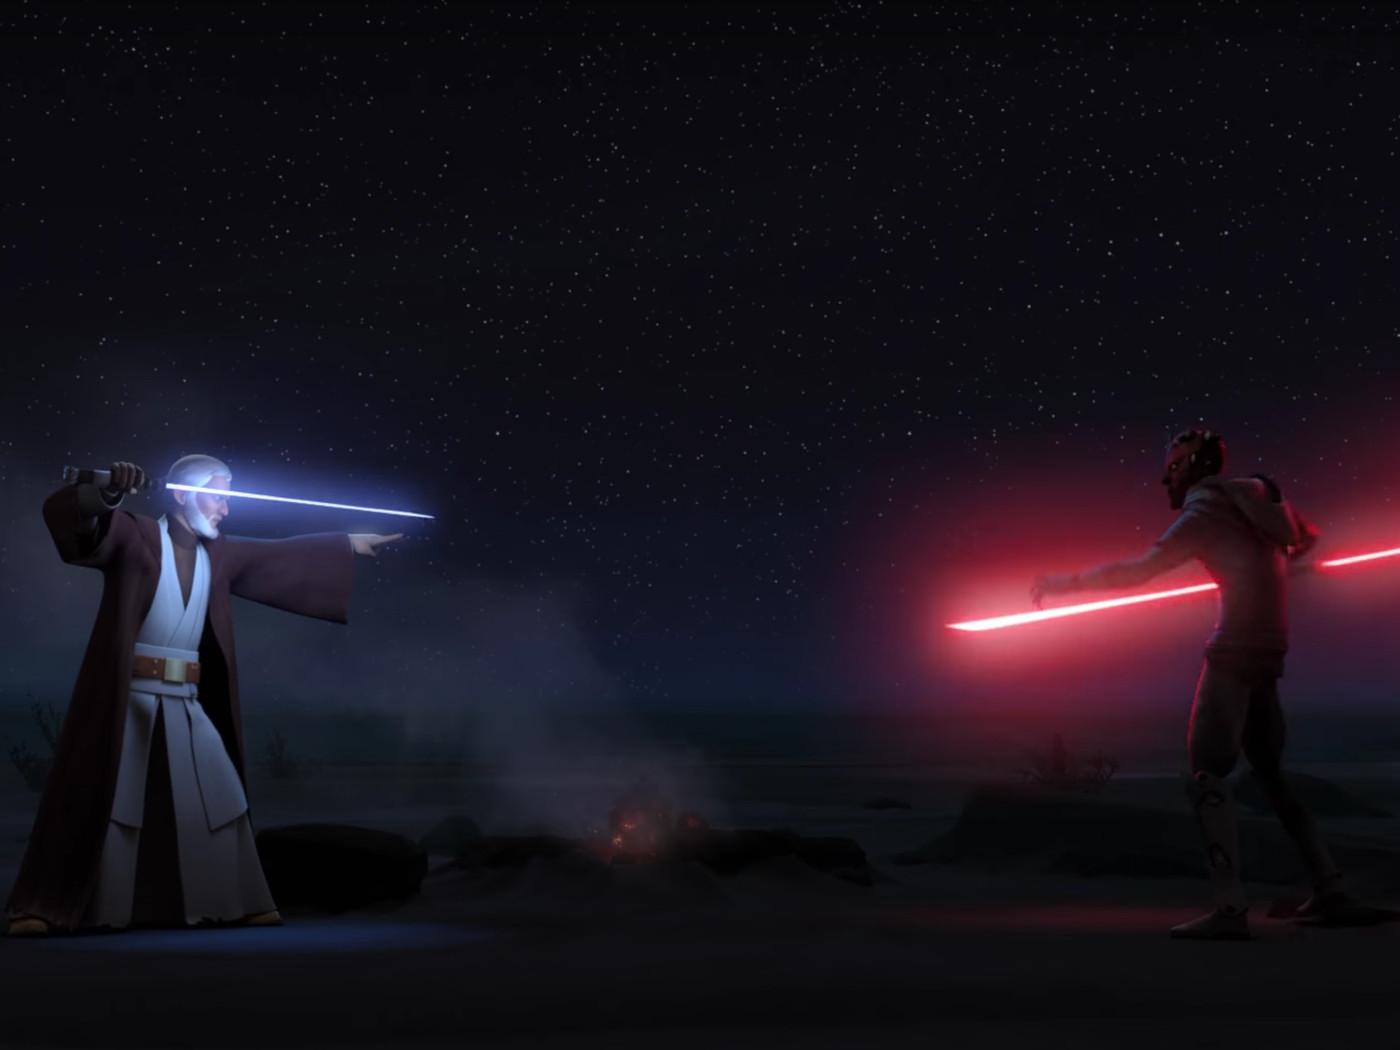 Star Wars: Rebels brought back Darth Maul this week for a